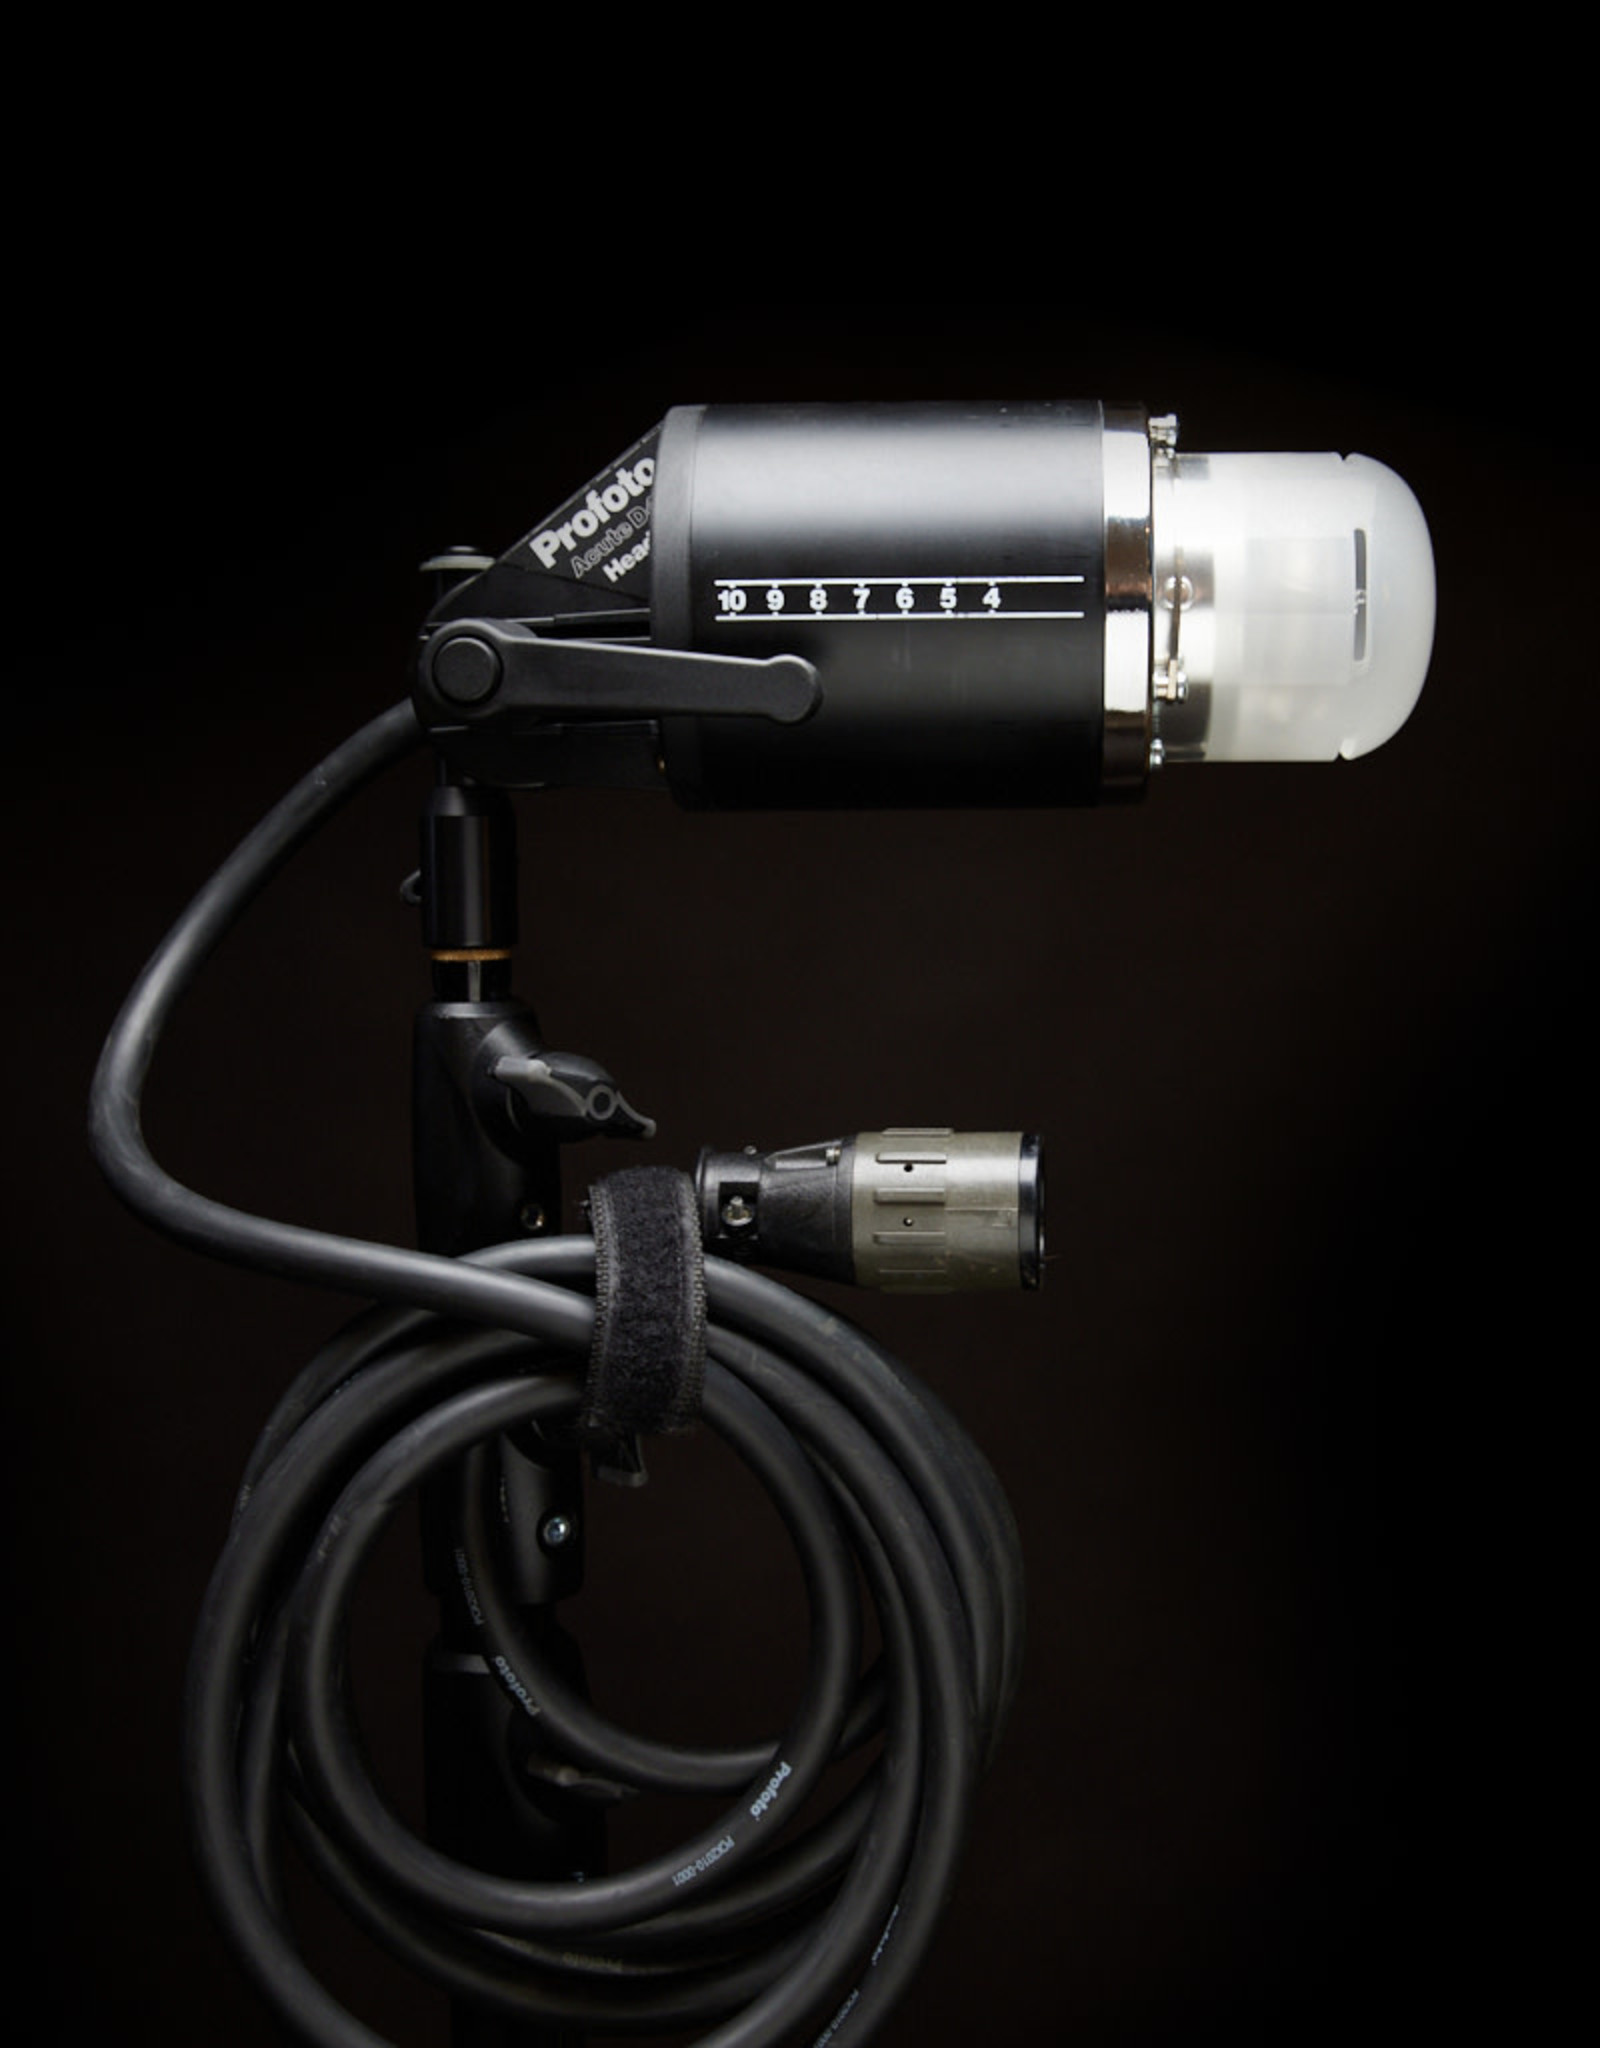 USED - Profoto Acute D4 Head with cap. Condition 8